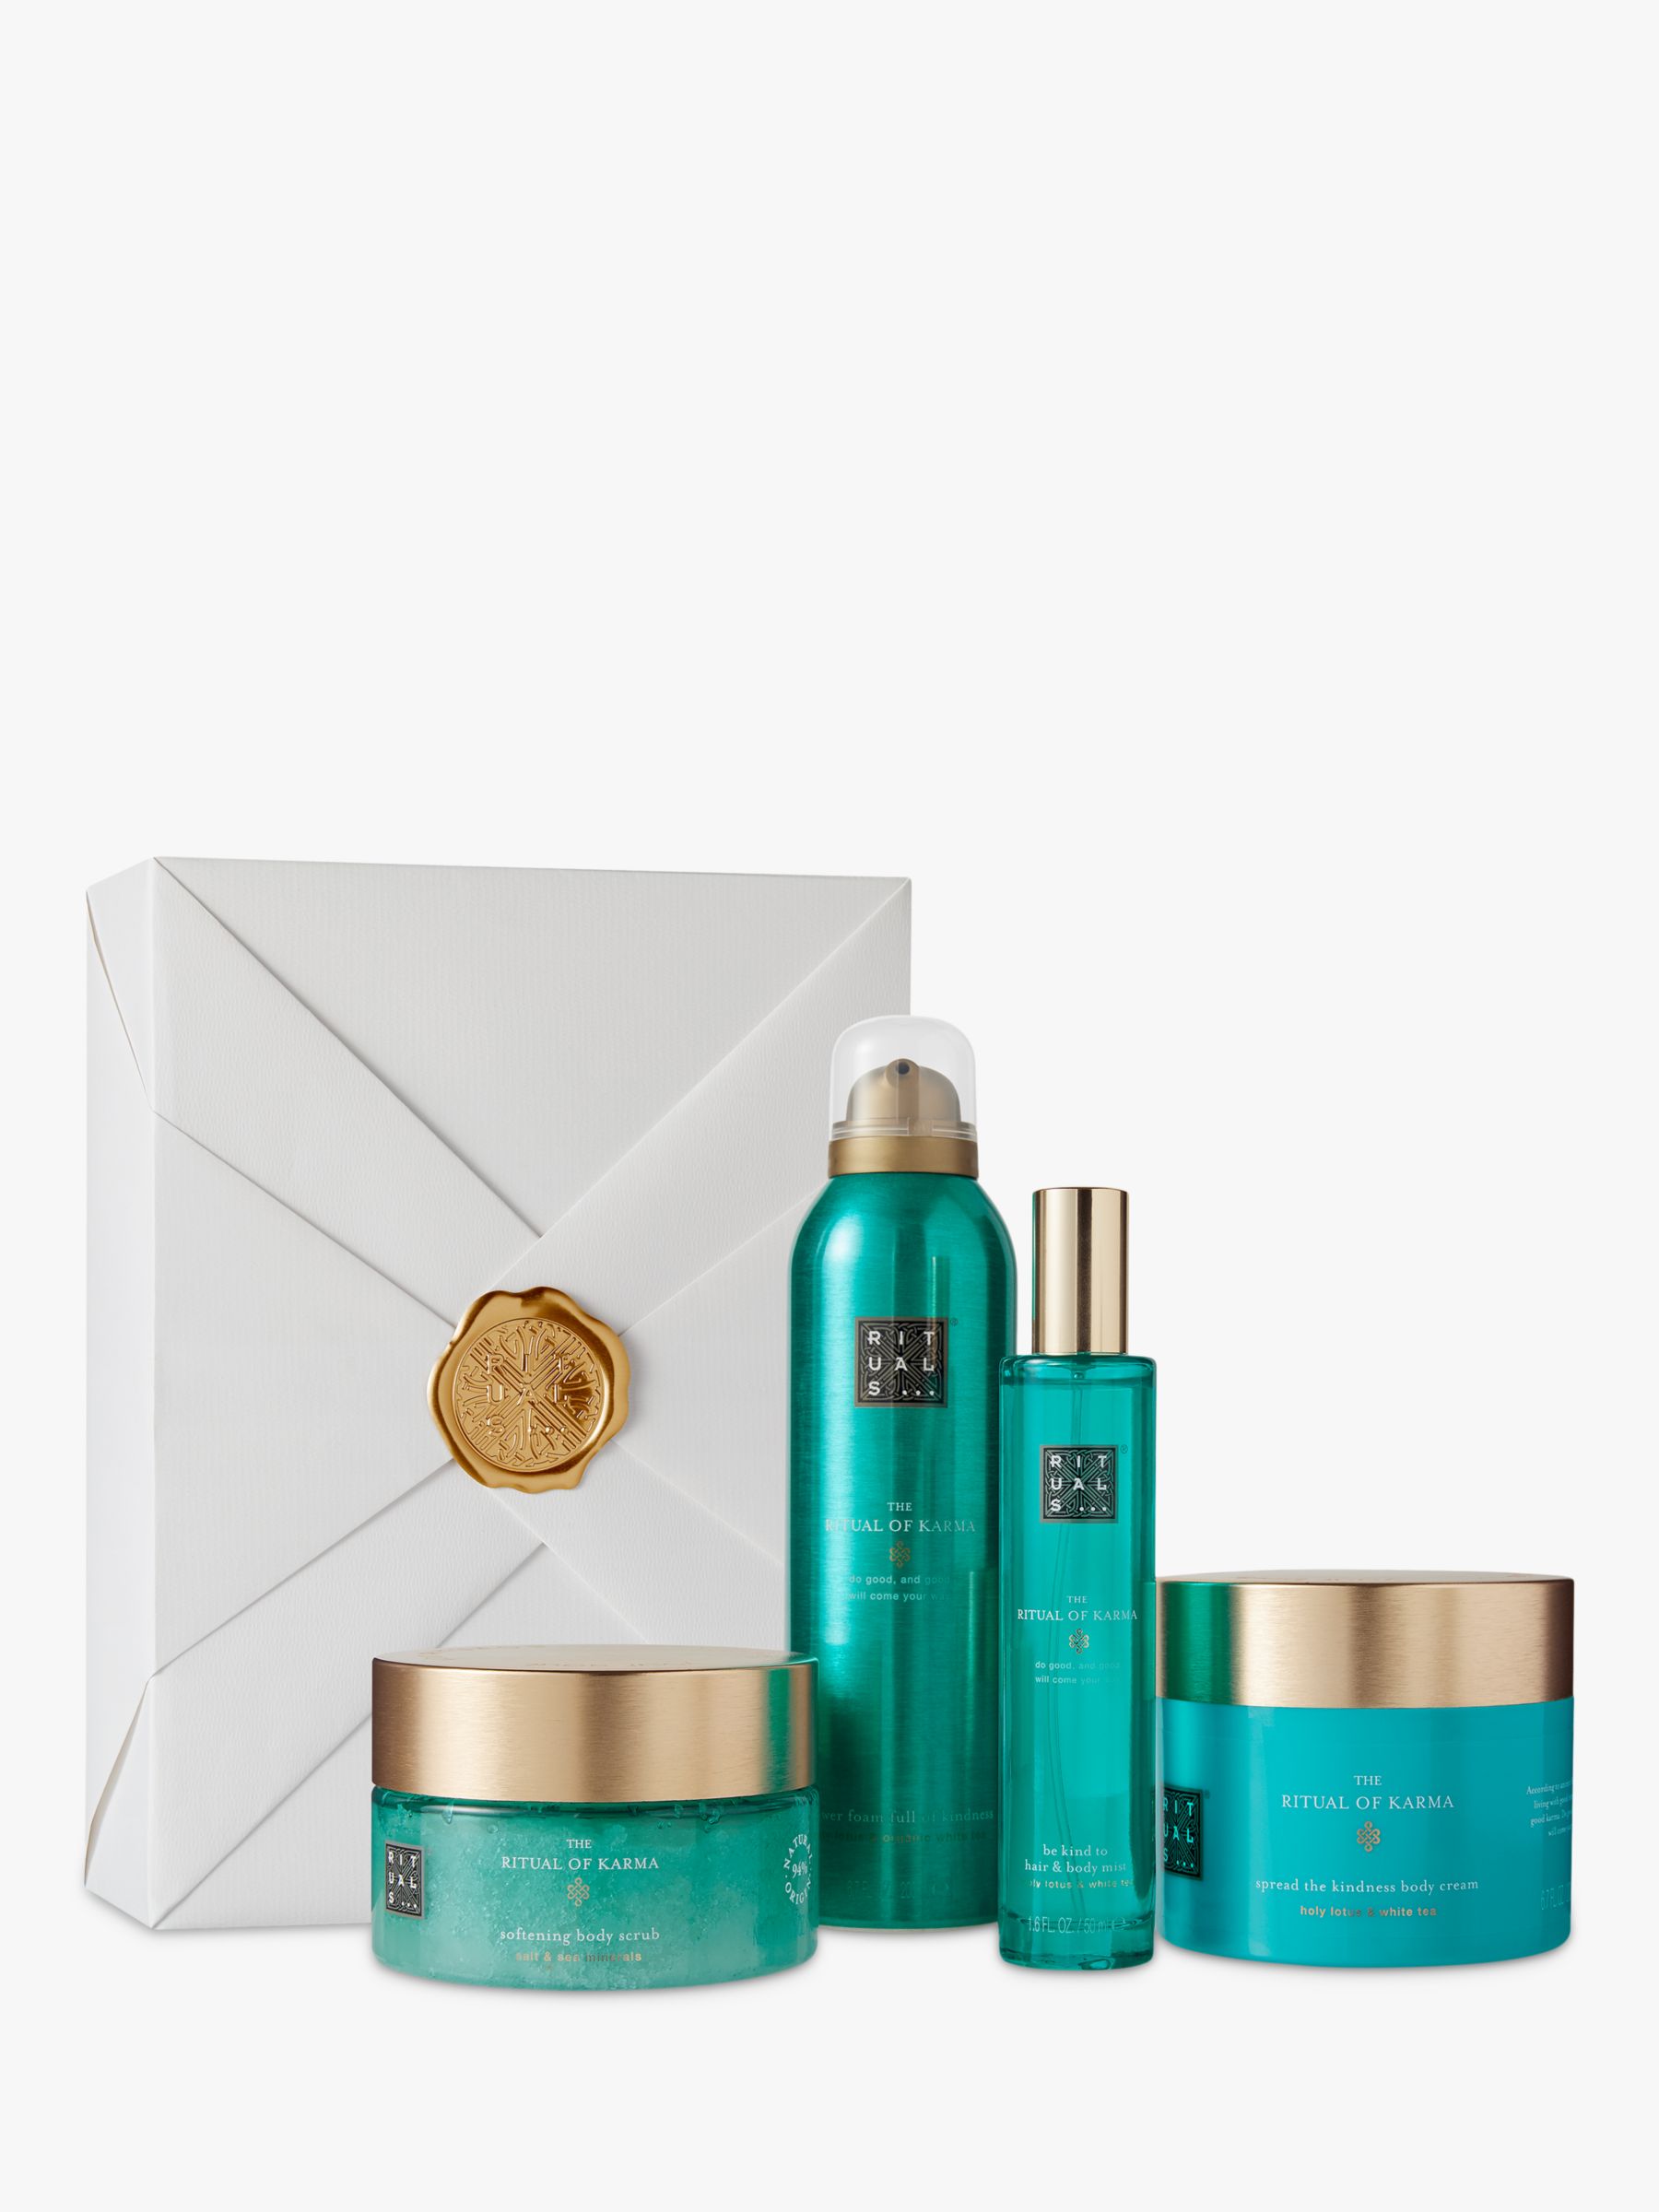 Rituals The Ritual of Karma Soothing Collection Bodycare Gift Set